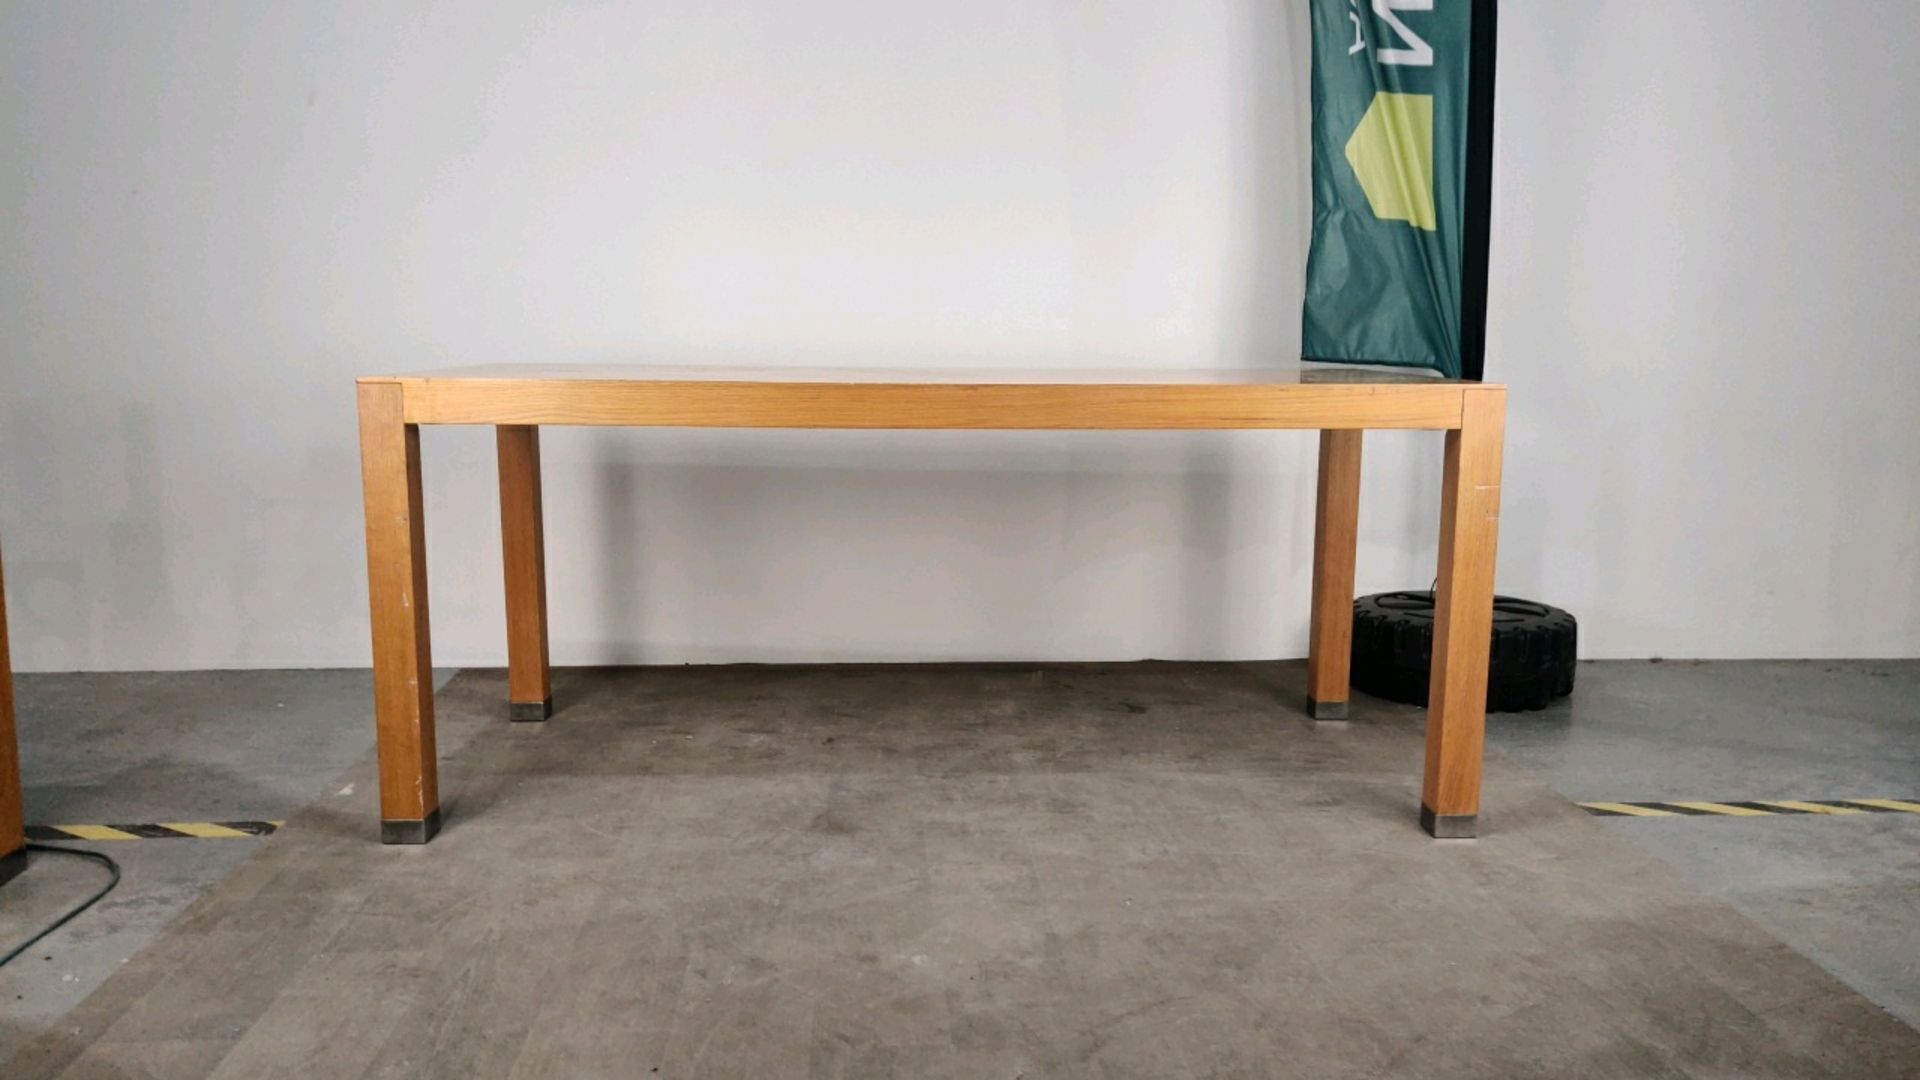 Large Wooden Table With Chromed Feet - Image 6 of 10